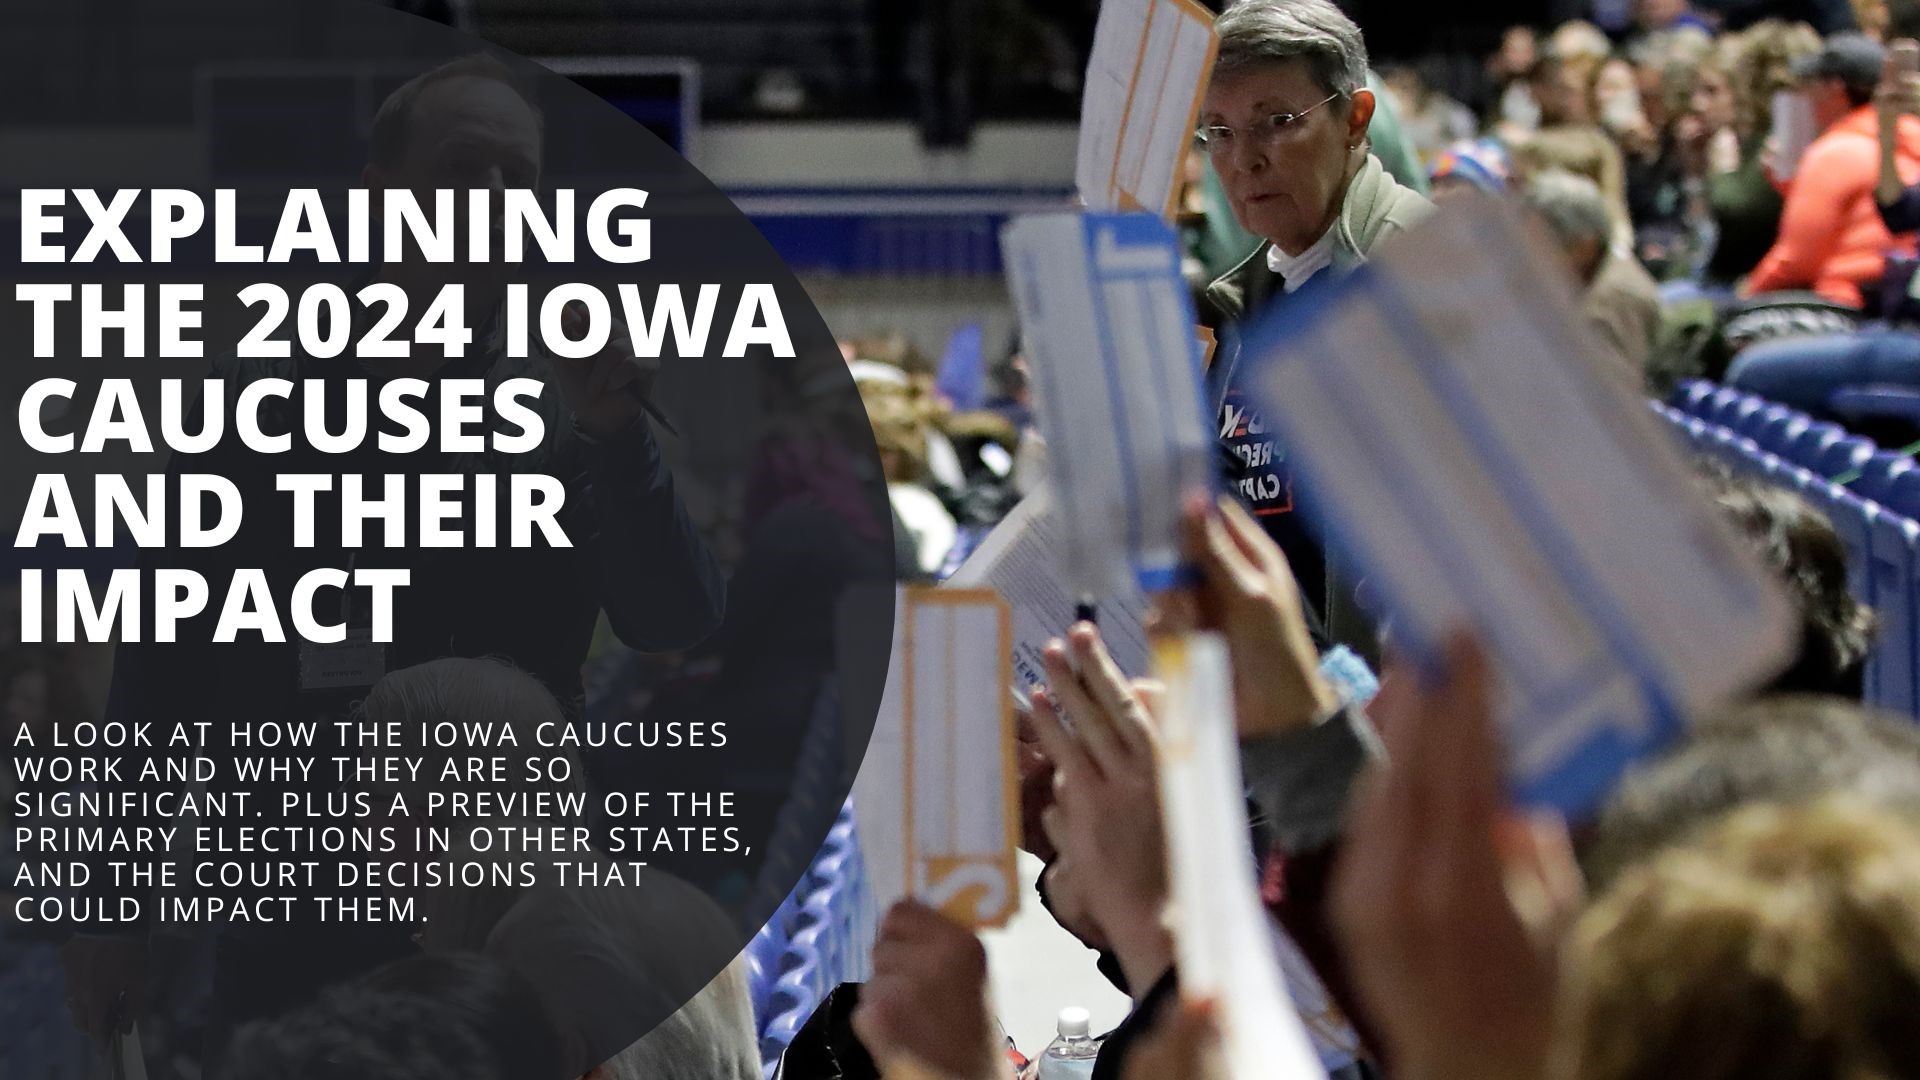 Explaining how the Iowa caucuses work and their significance. Plus a preview of the primaries in other states, and the court decision that will impact ballots.